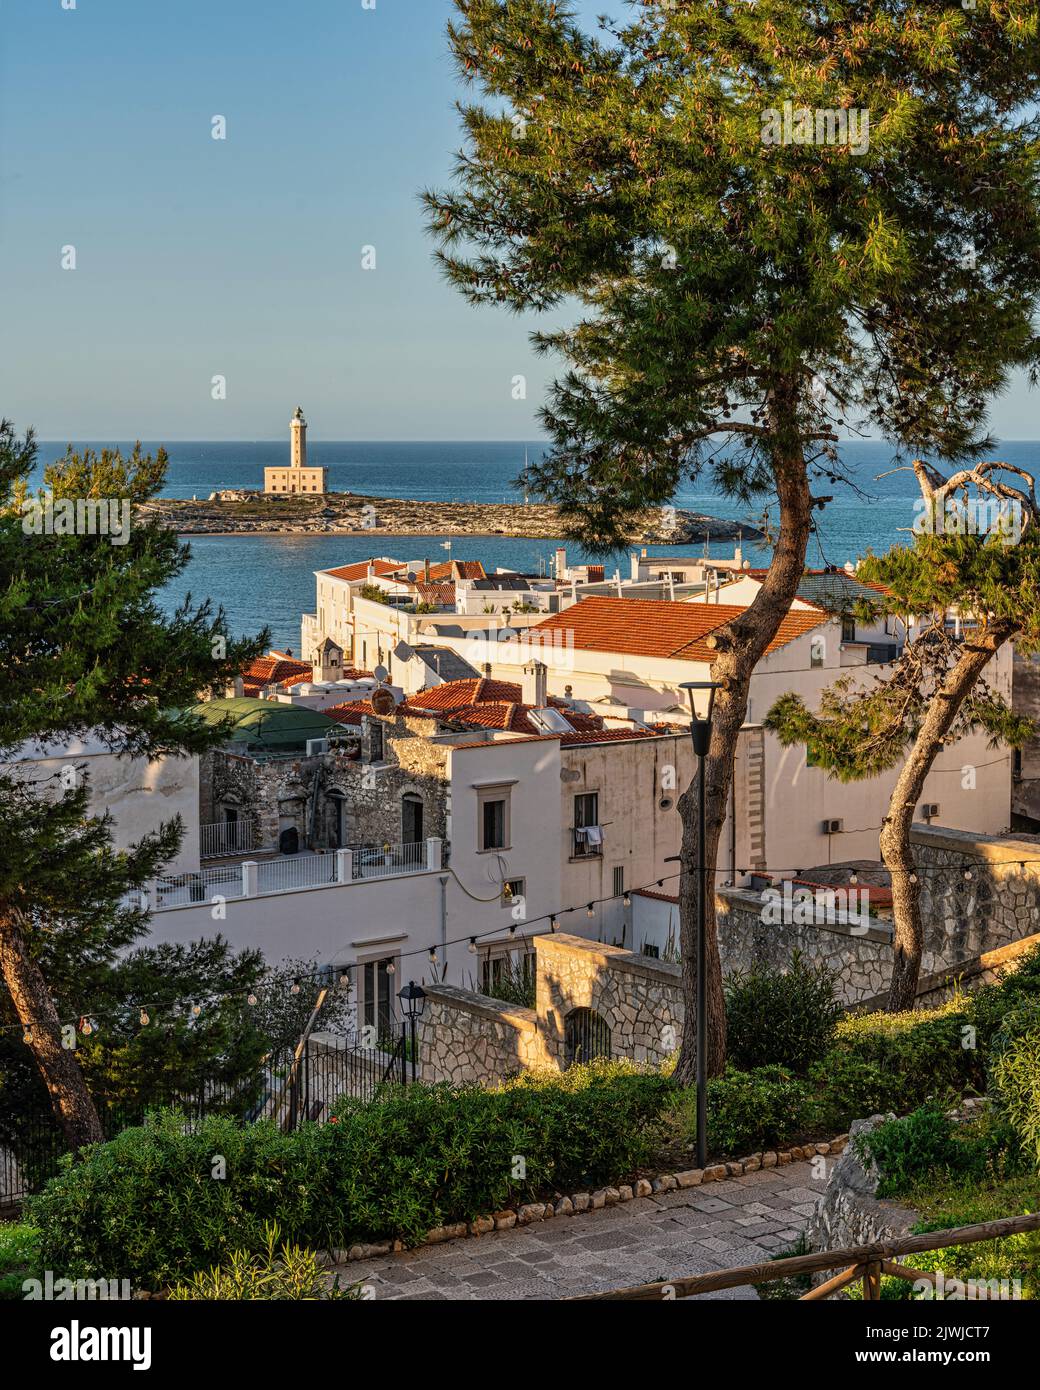 The Vieste lighthouse from the entrance door to the historic center of Vieste. Vieste, Foggia province, Puglia, Italy, Europe Stock Photo